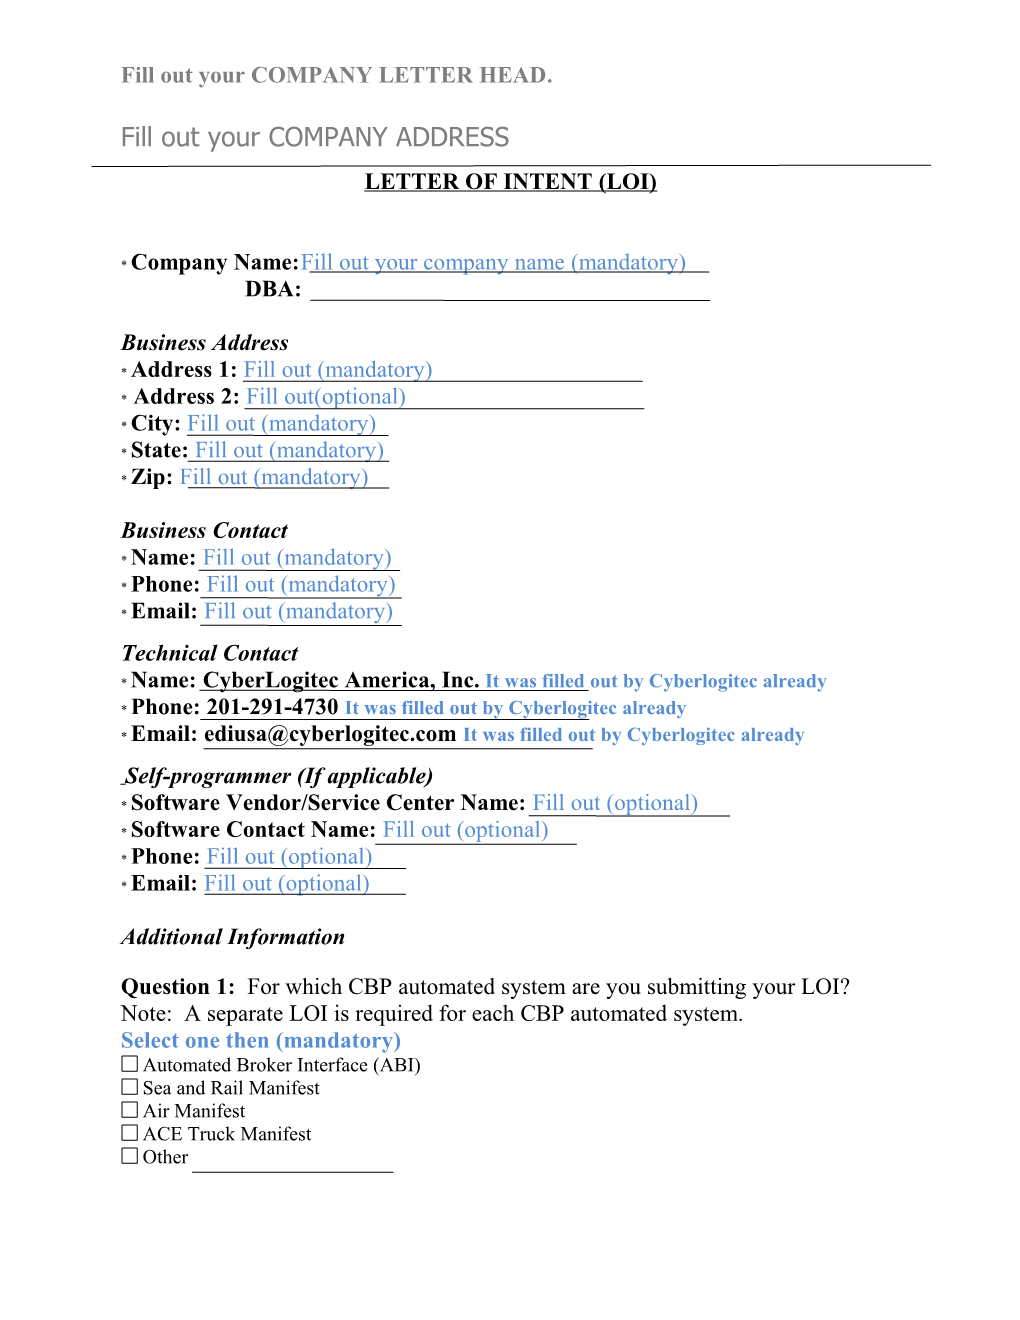 Fill out Your COMPANY LETTER HEAD